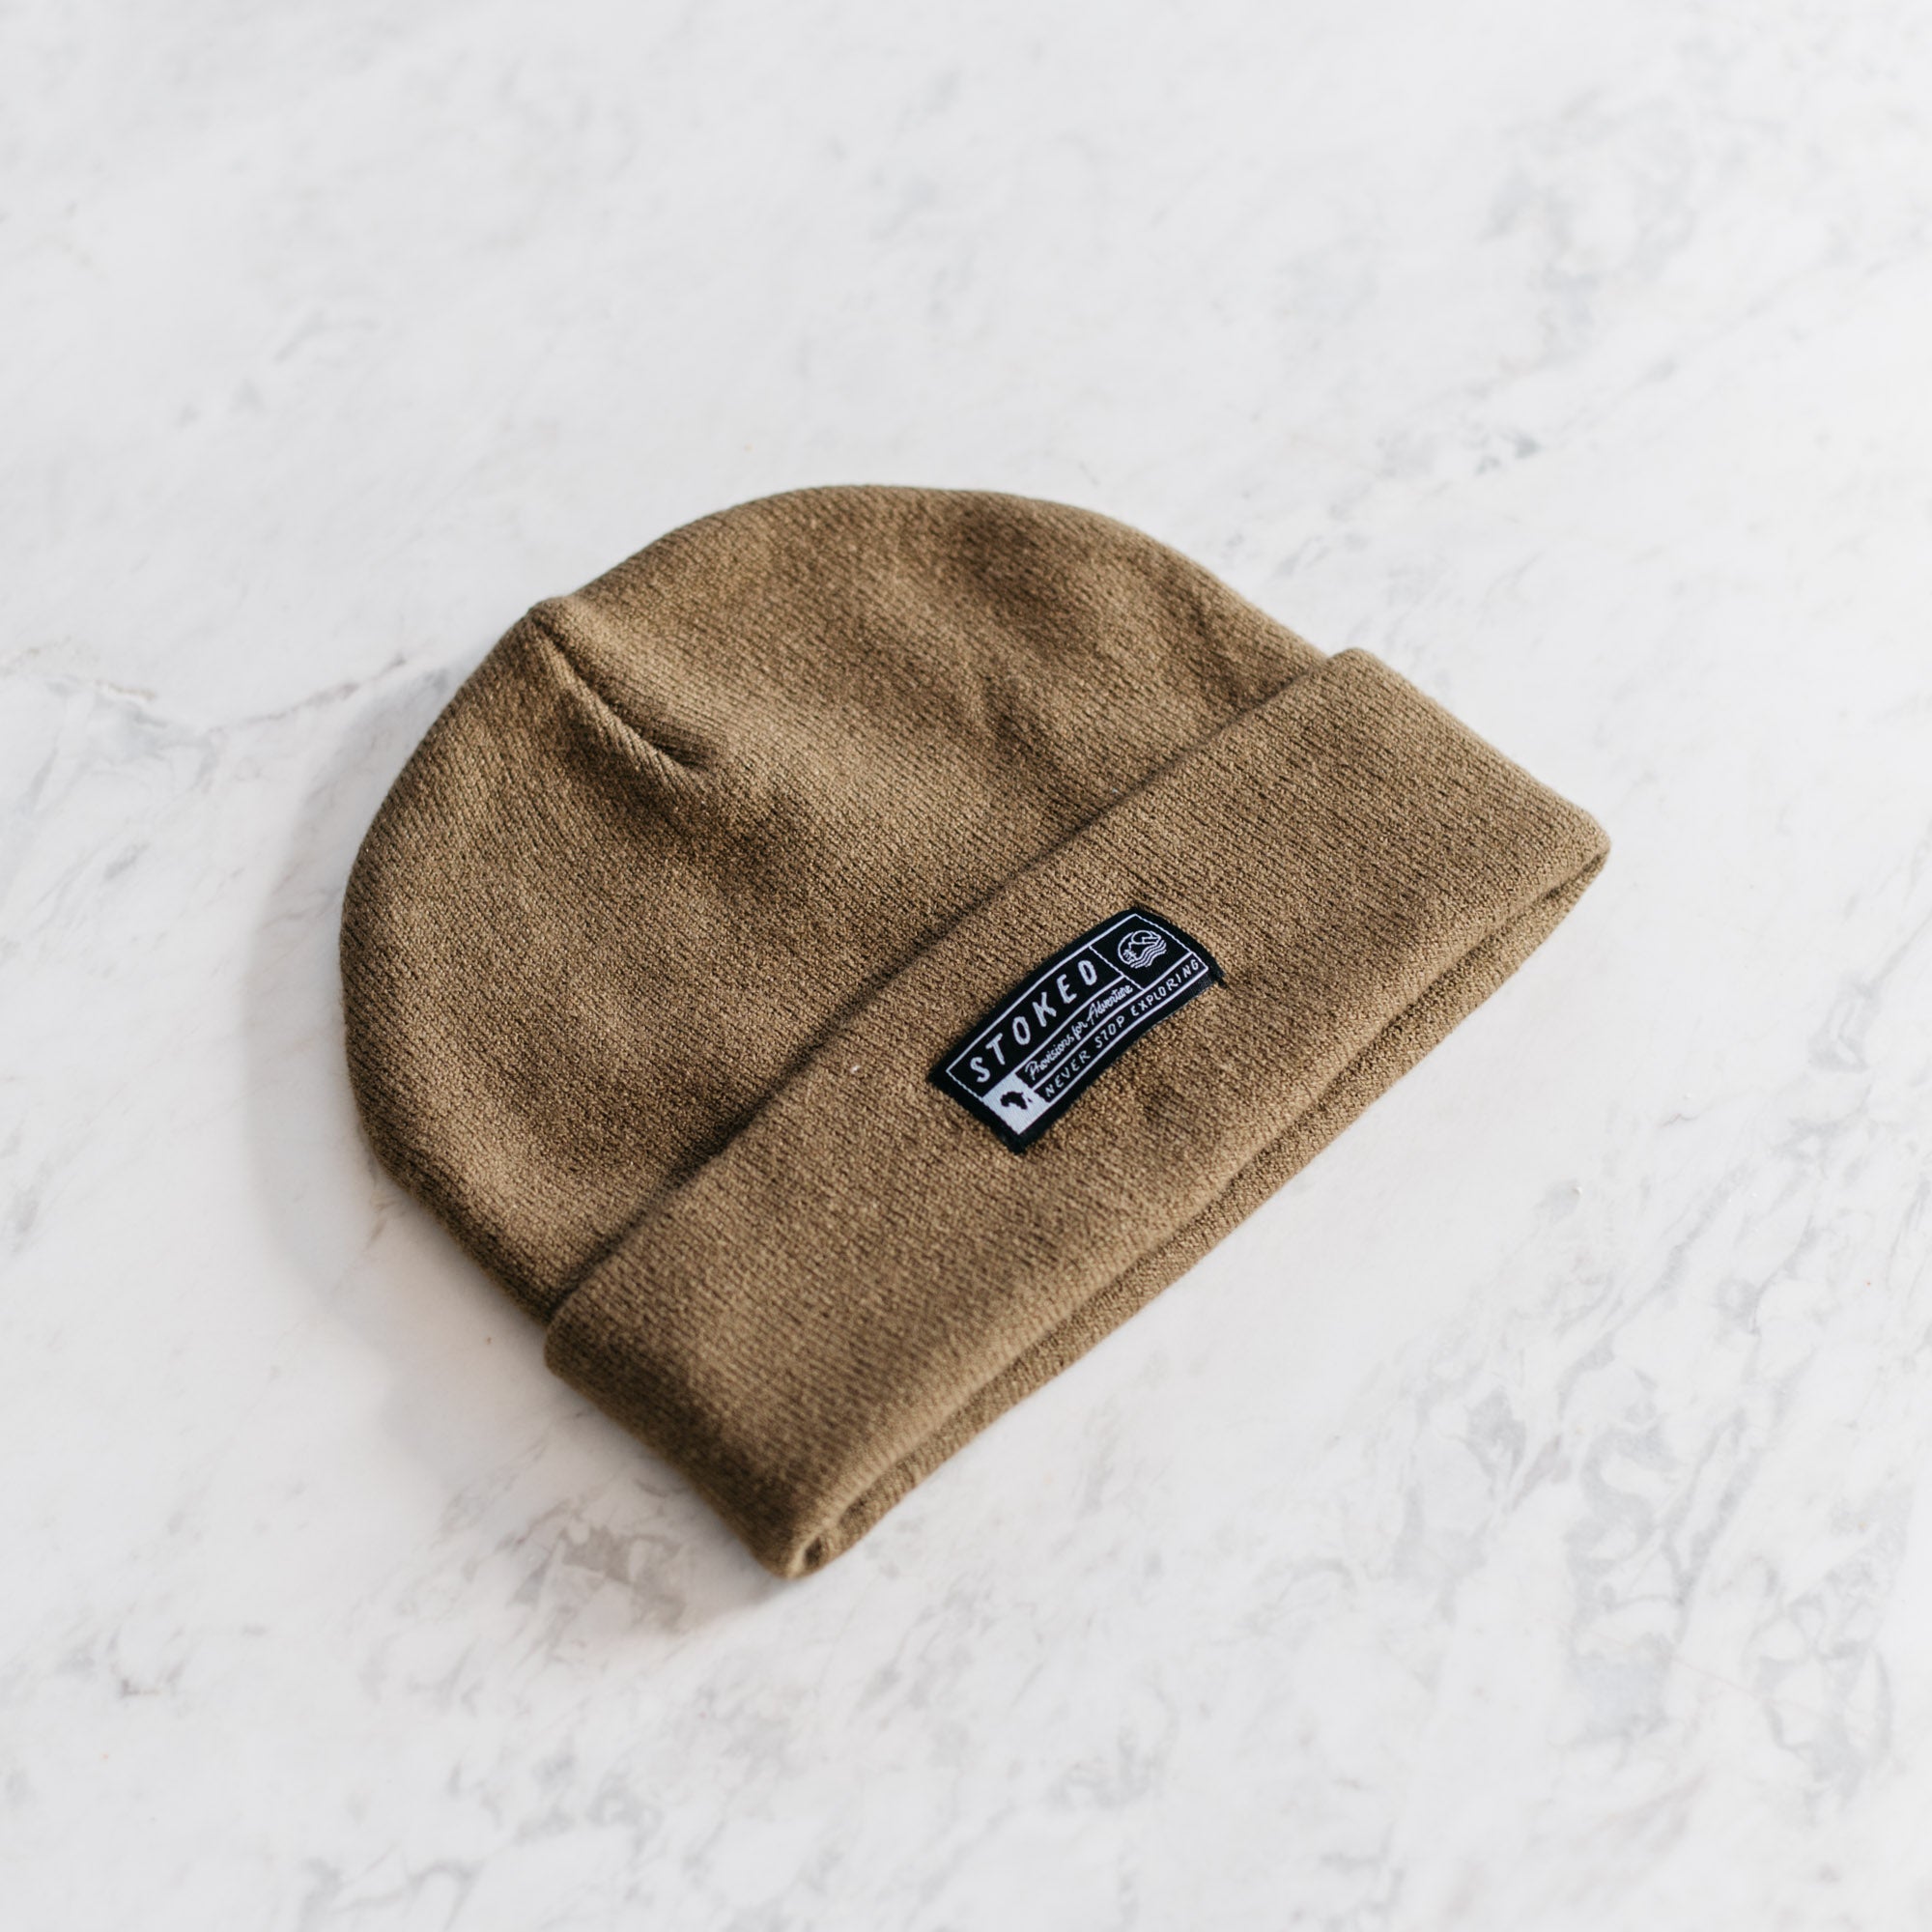 The Khaki Dessert Beanie - Stokedthebrand. Lifestyle products for outdoor adventures. Made in South Africa